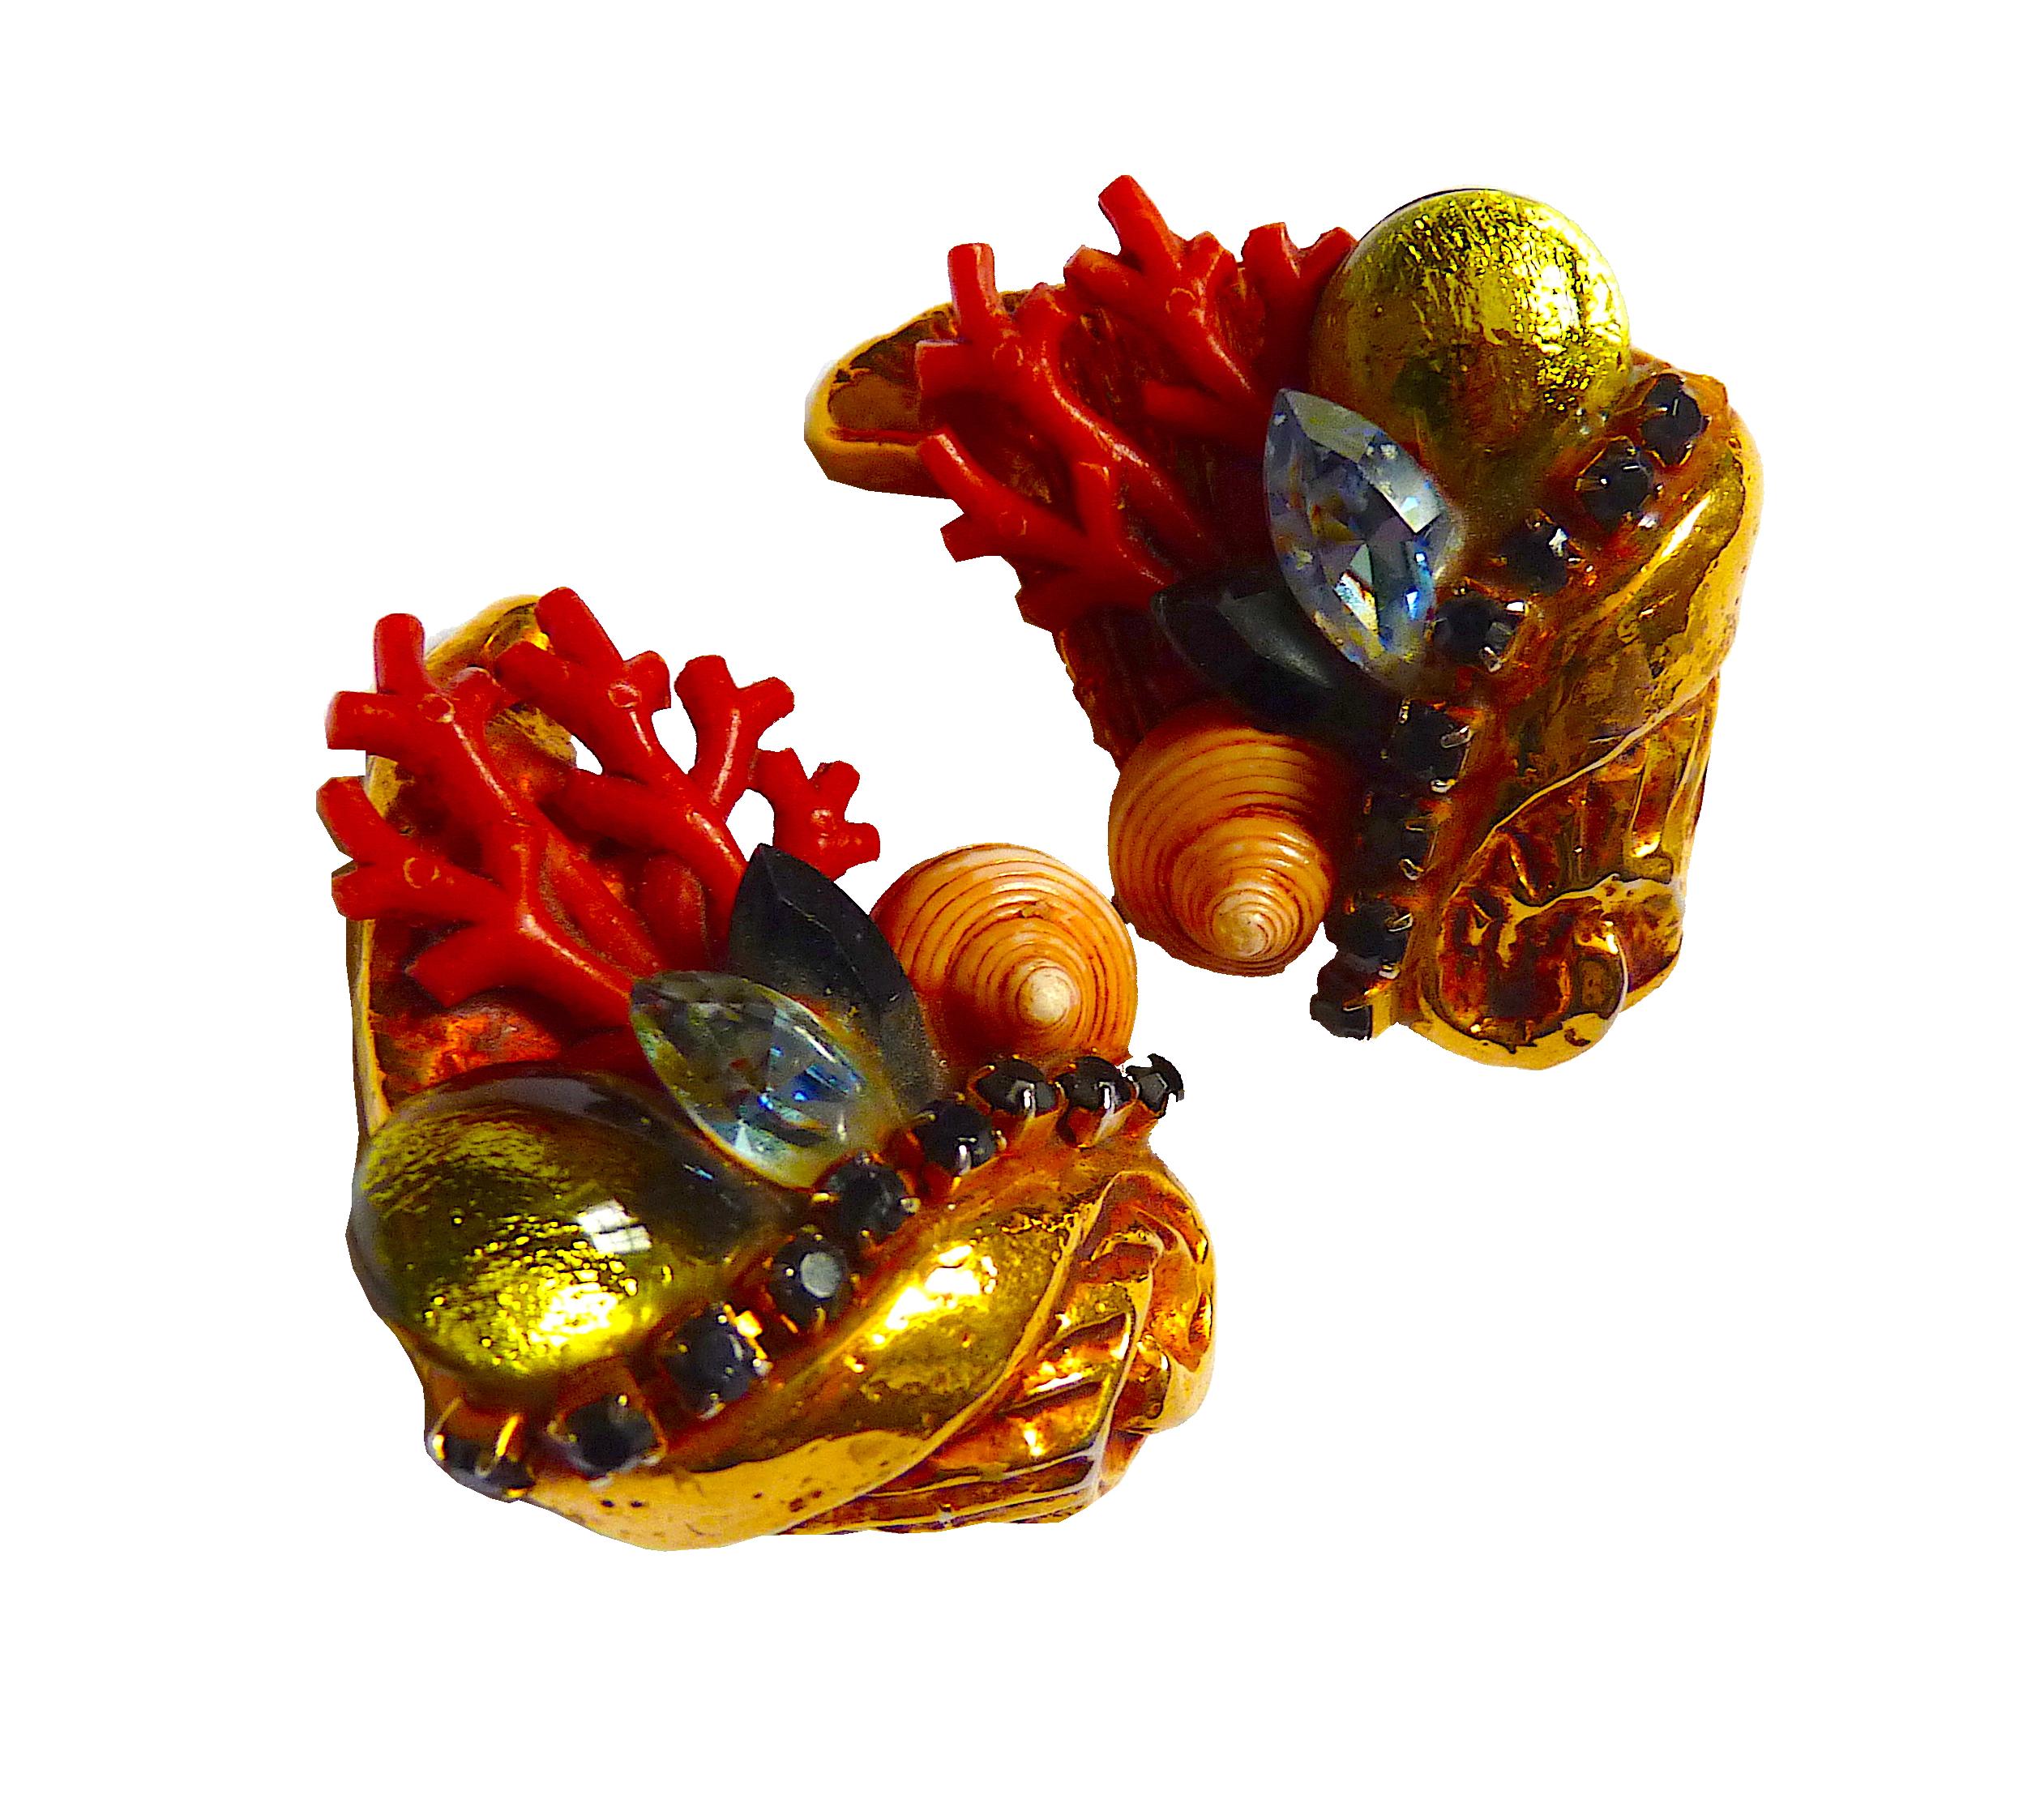 Kalinger Paris clip on earrings in gold metal decorated with exquisite natural sea shells, red and green glass beads, blue and green crystals, vintage from the 1980s

Signed KALINGER PARIS at back of each clip

Condition : Very nice vintage